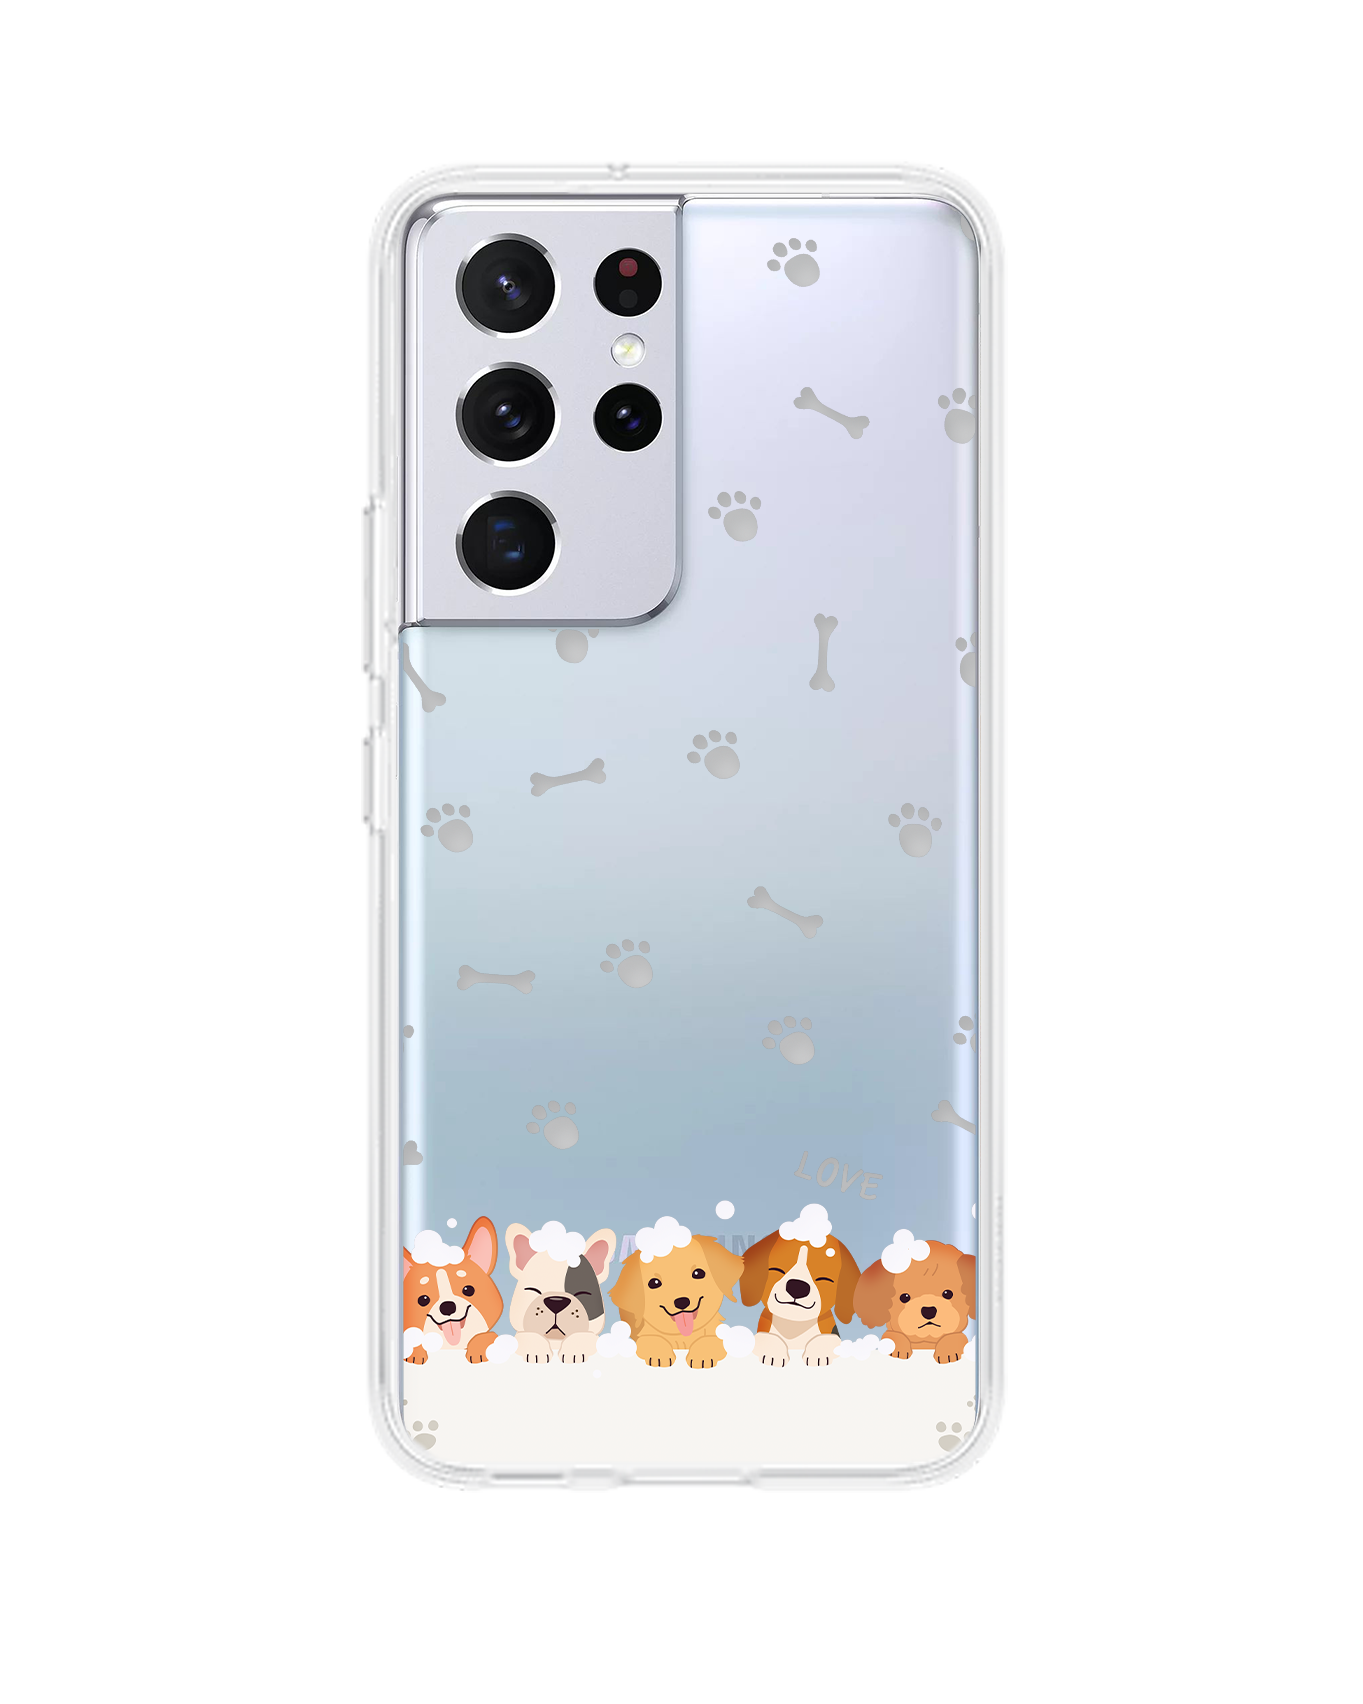 Android Rearguard Hybrid Case - Ruff Family 2.0